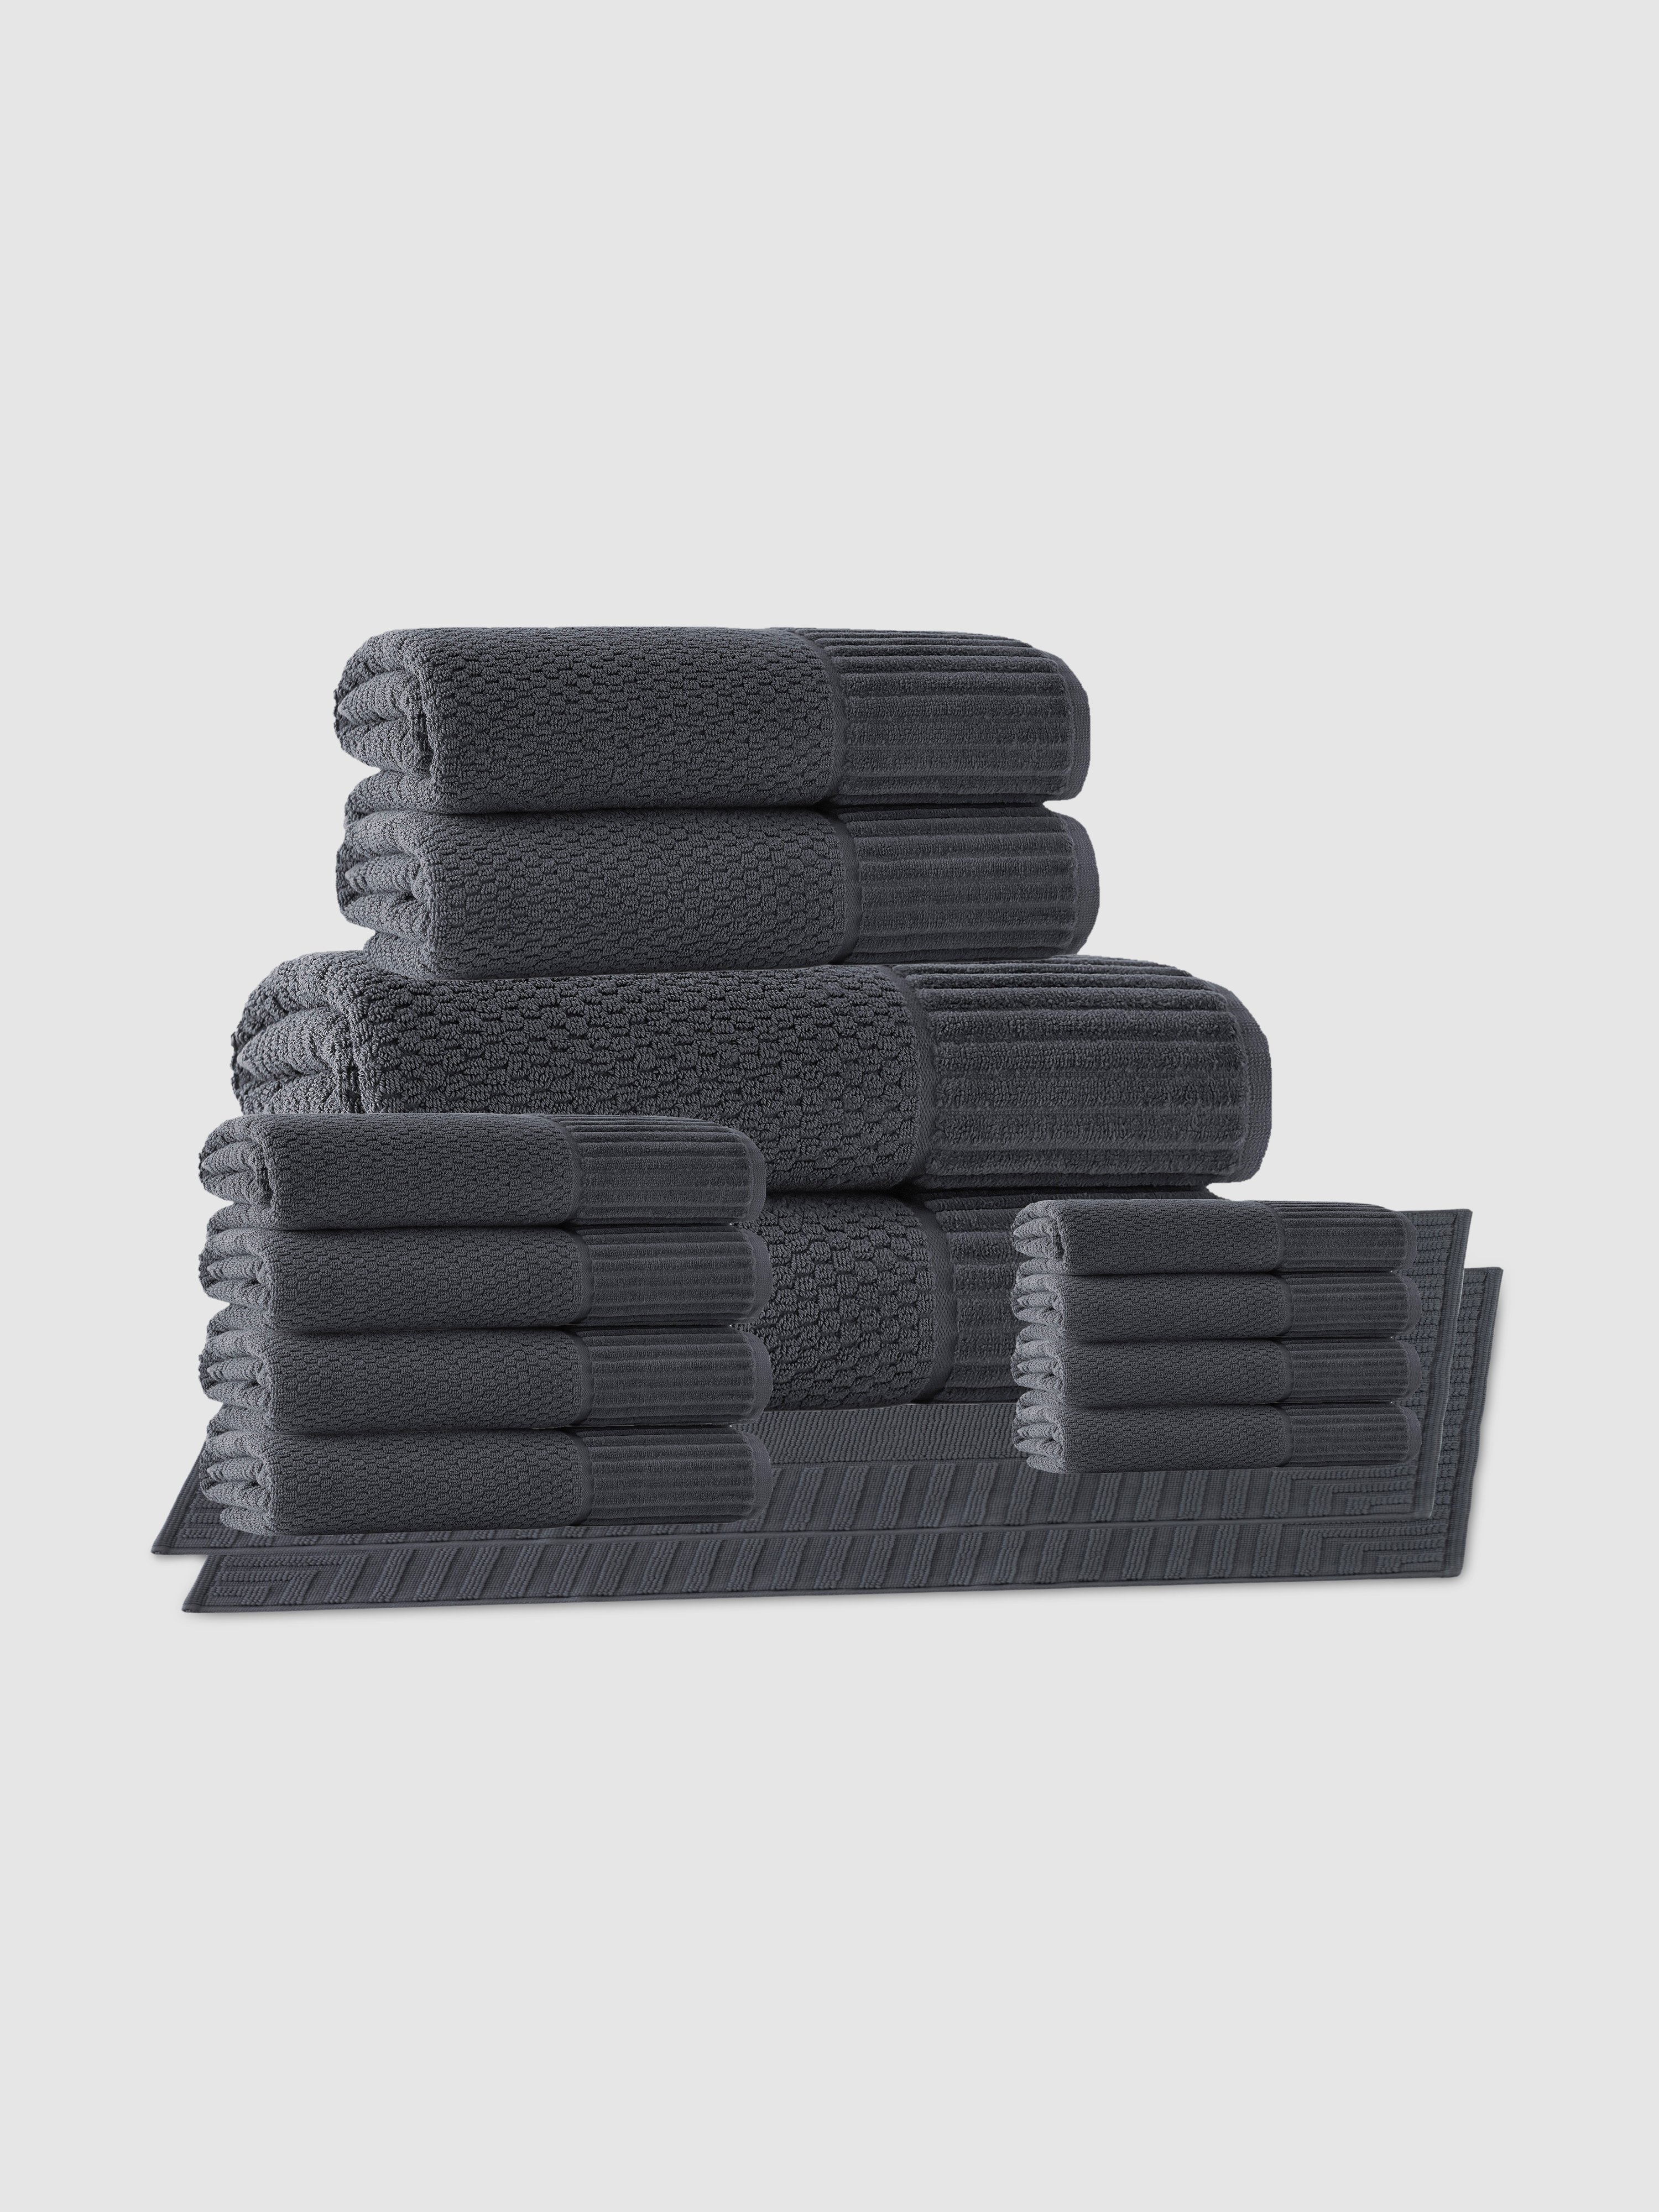 Enchante Home Timaru Turkish Cotton Towel Set Of 16 In Anthracite